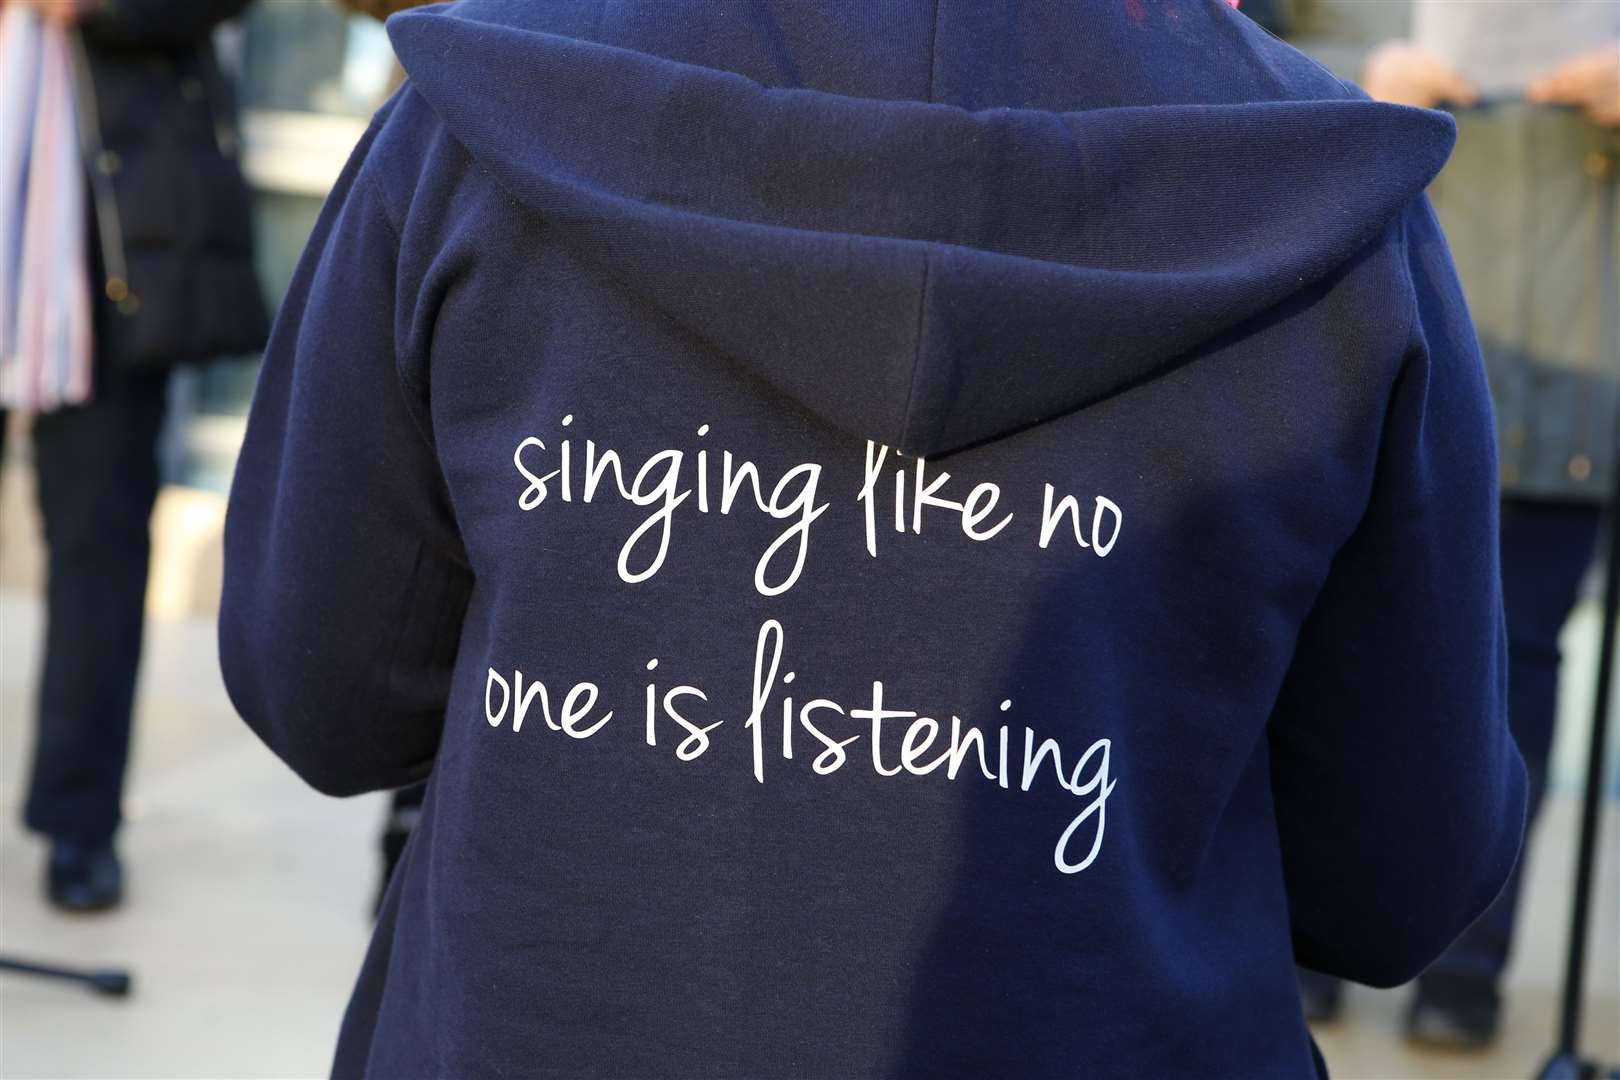 The choir wears its motto with pride